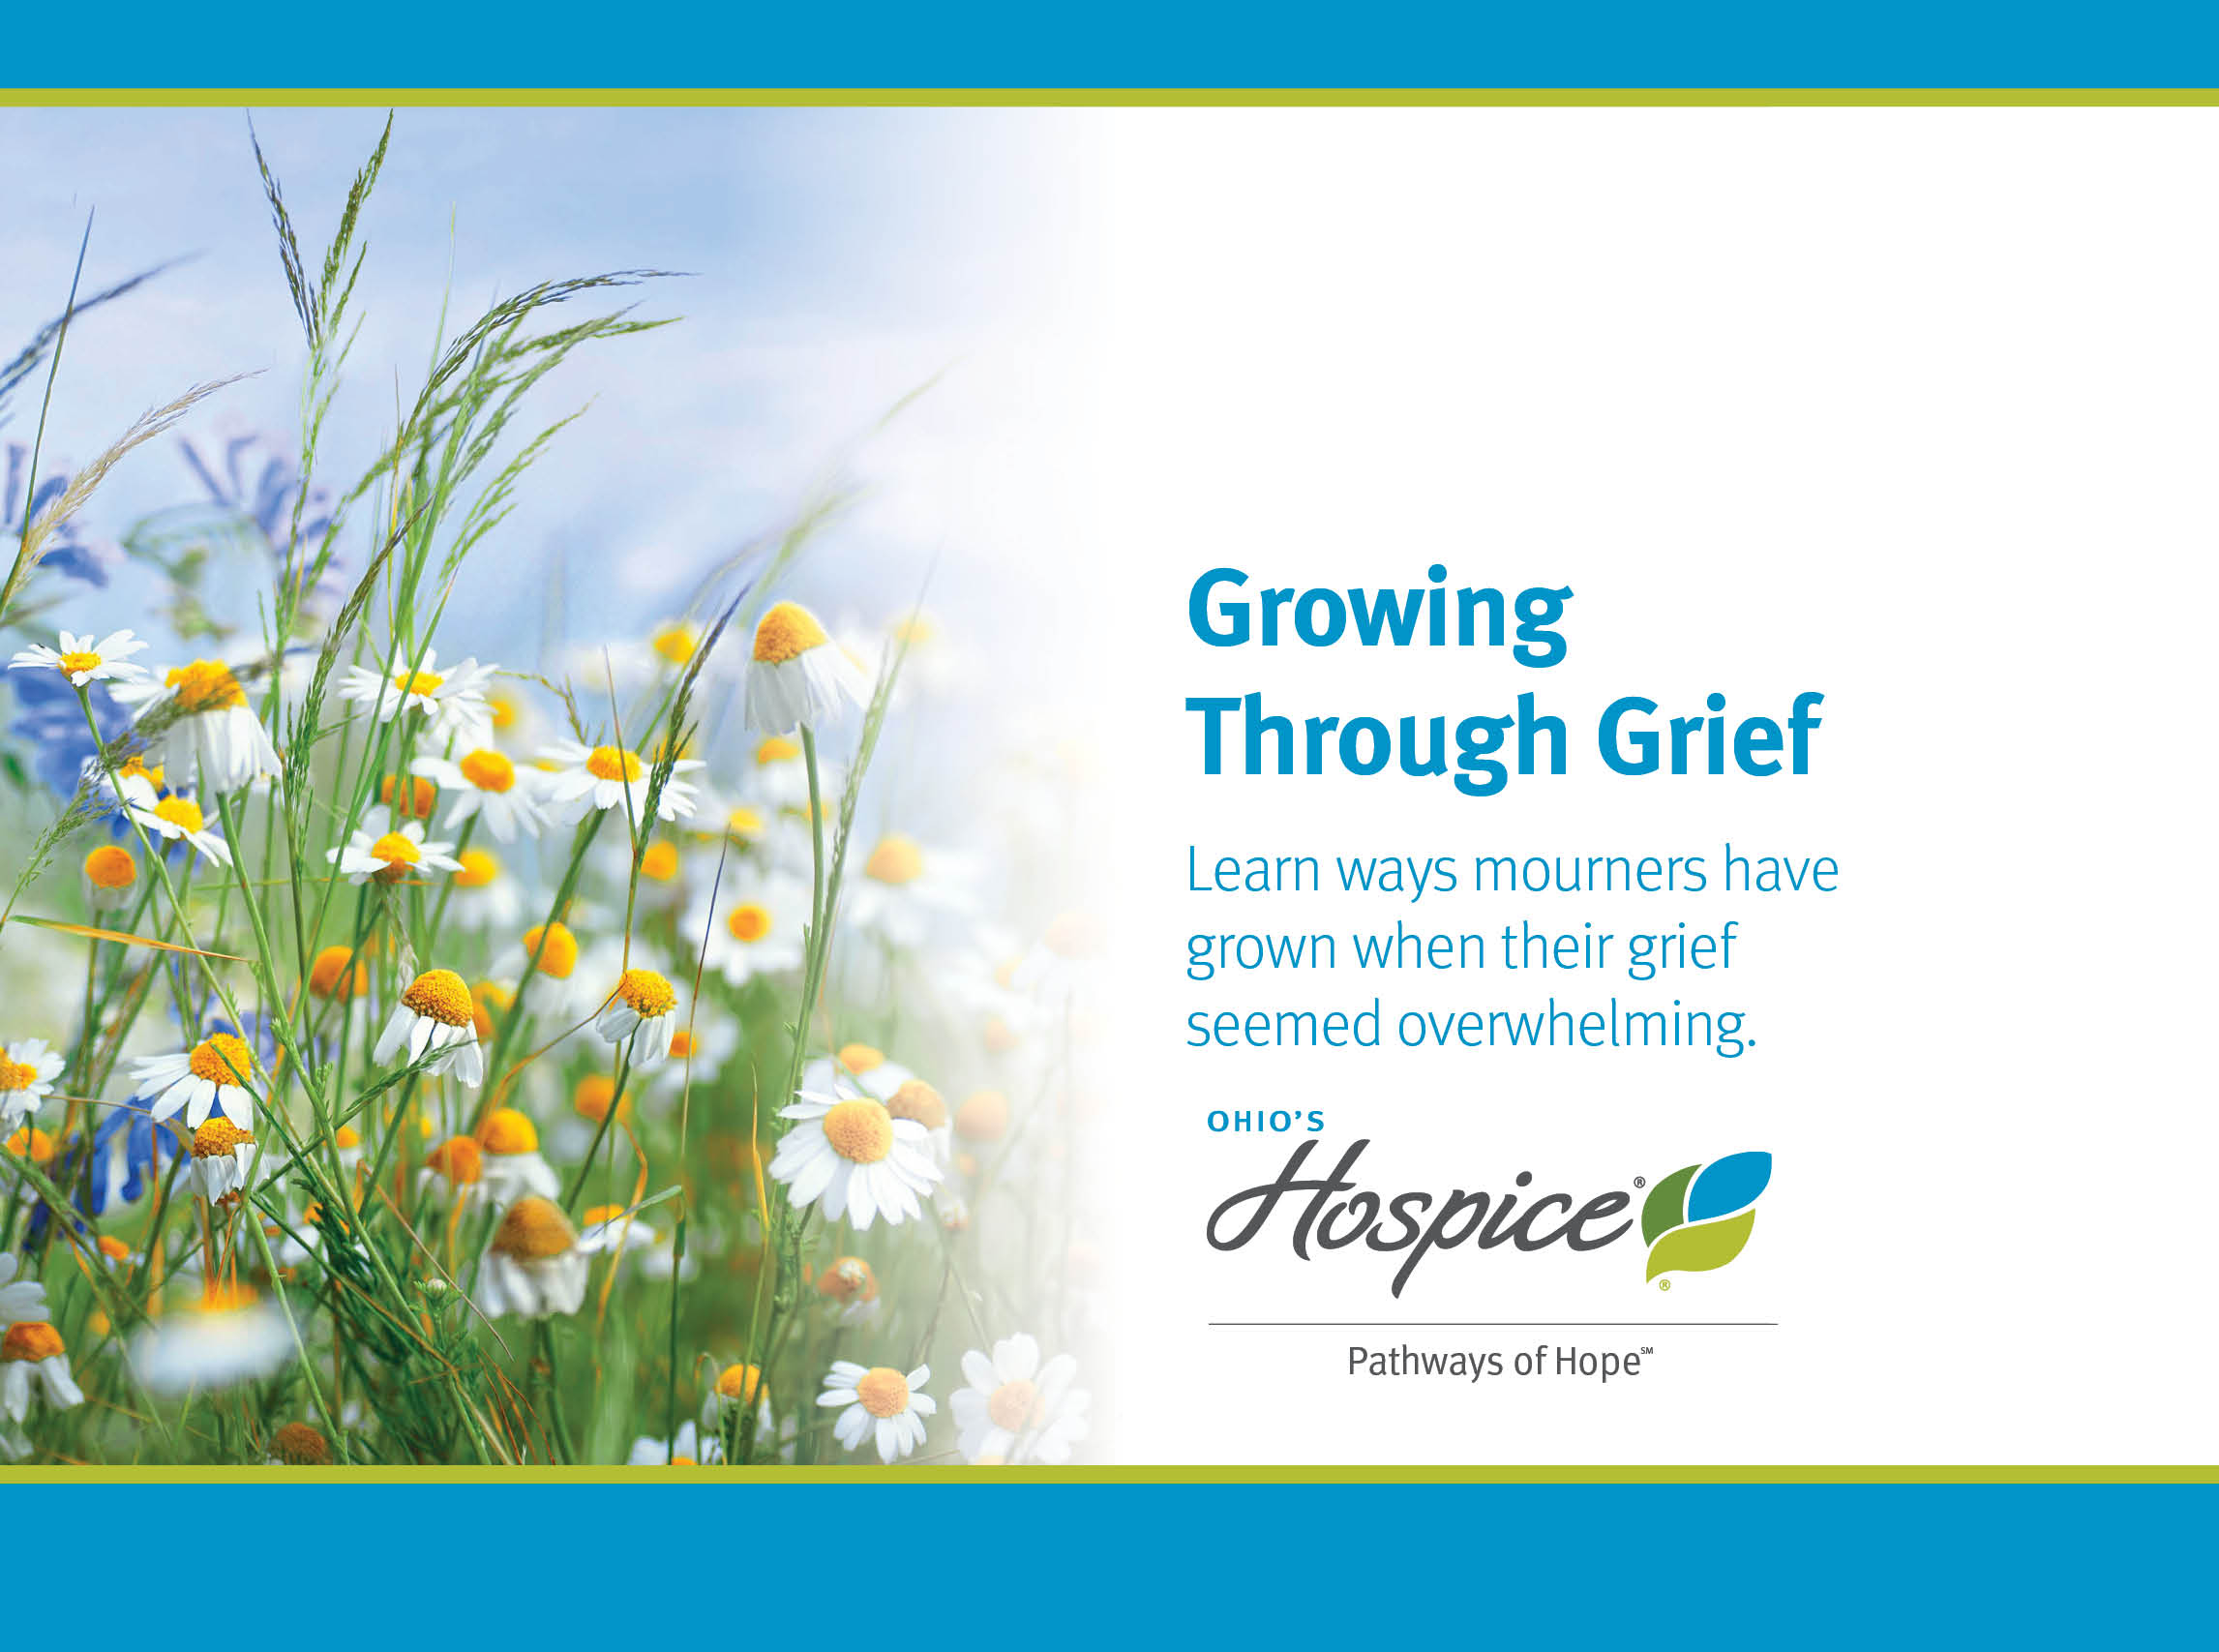 Growing Through Grief Ohio's Hospice Pathways of Hope